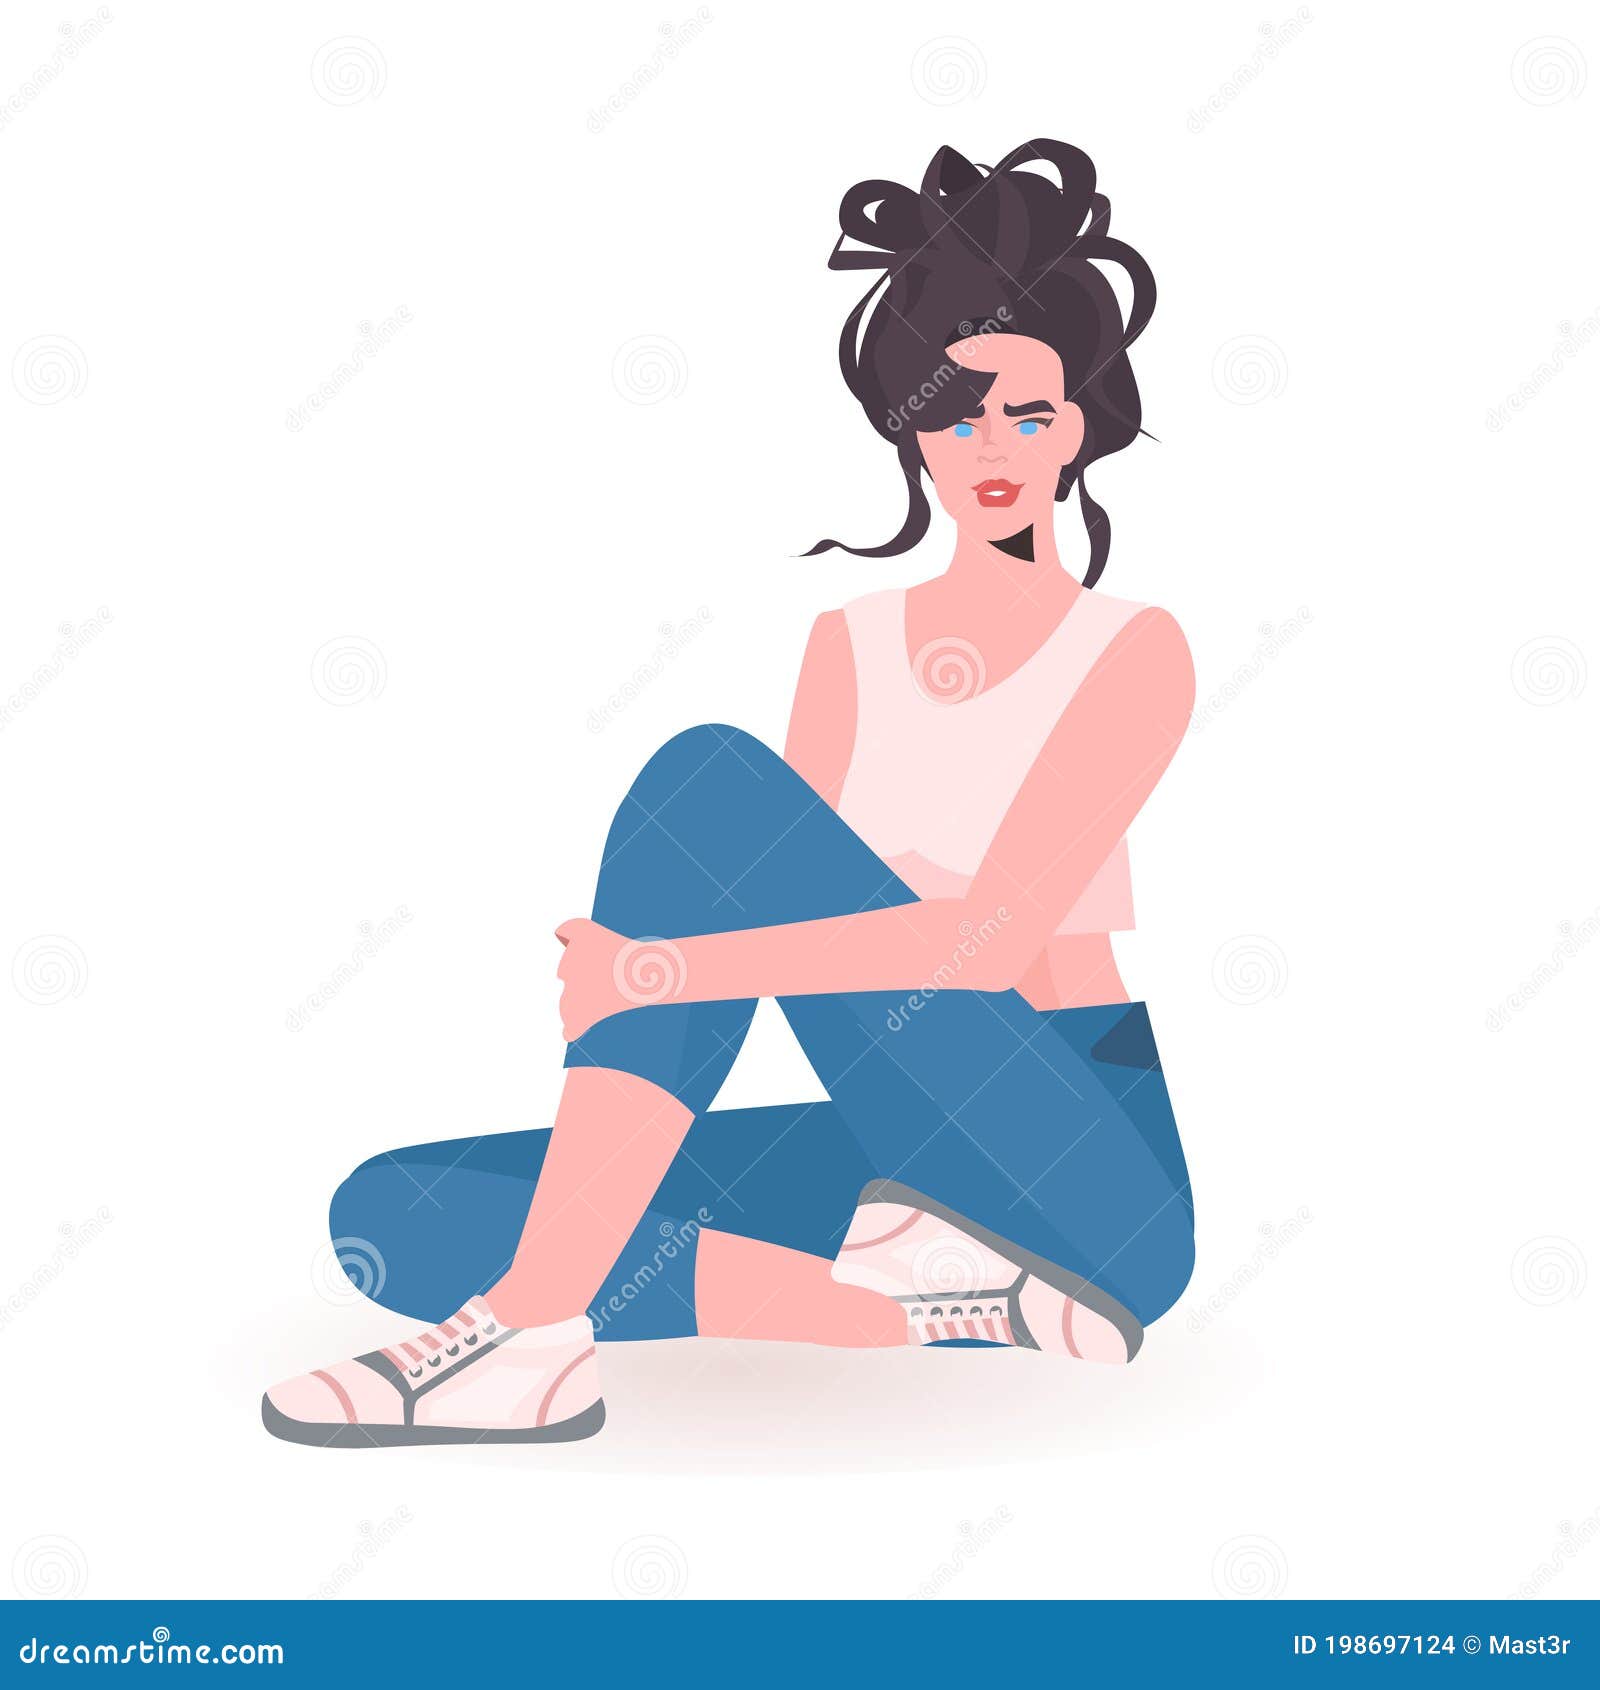 Beautiful Girl In Casual Clothes Female Cartoon Character Sitting Pose  Royalty Free SVG, Cliparts, Vectors, and Stock Illustration. Image  156684949.